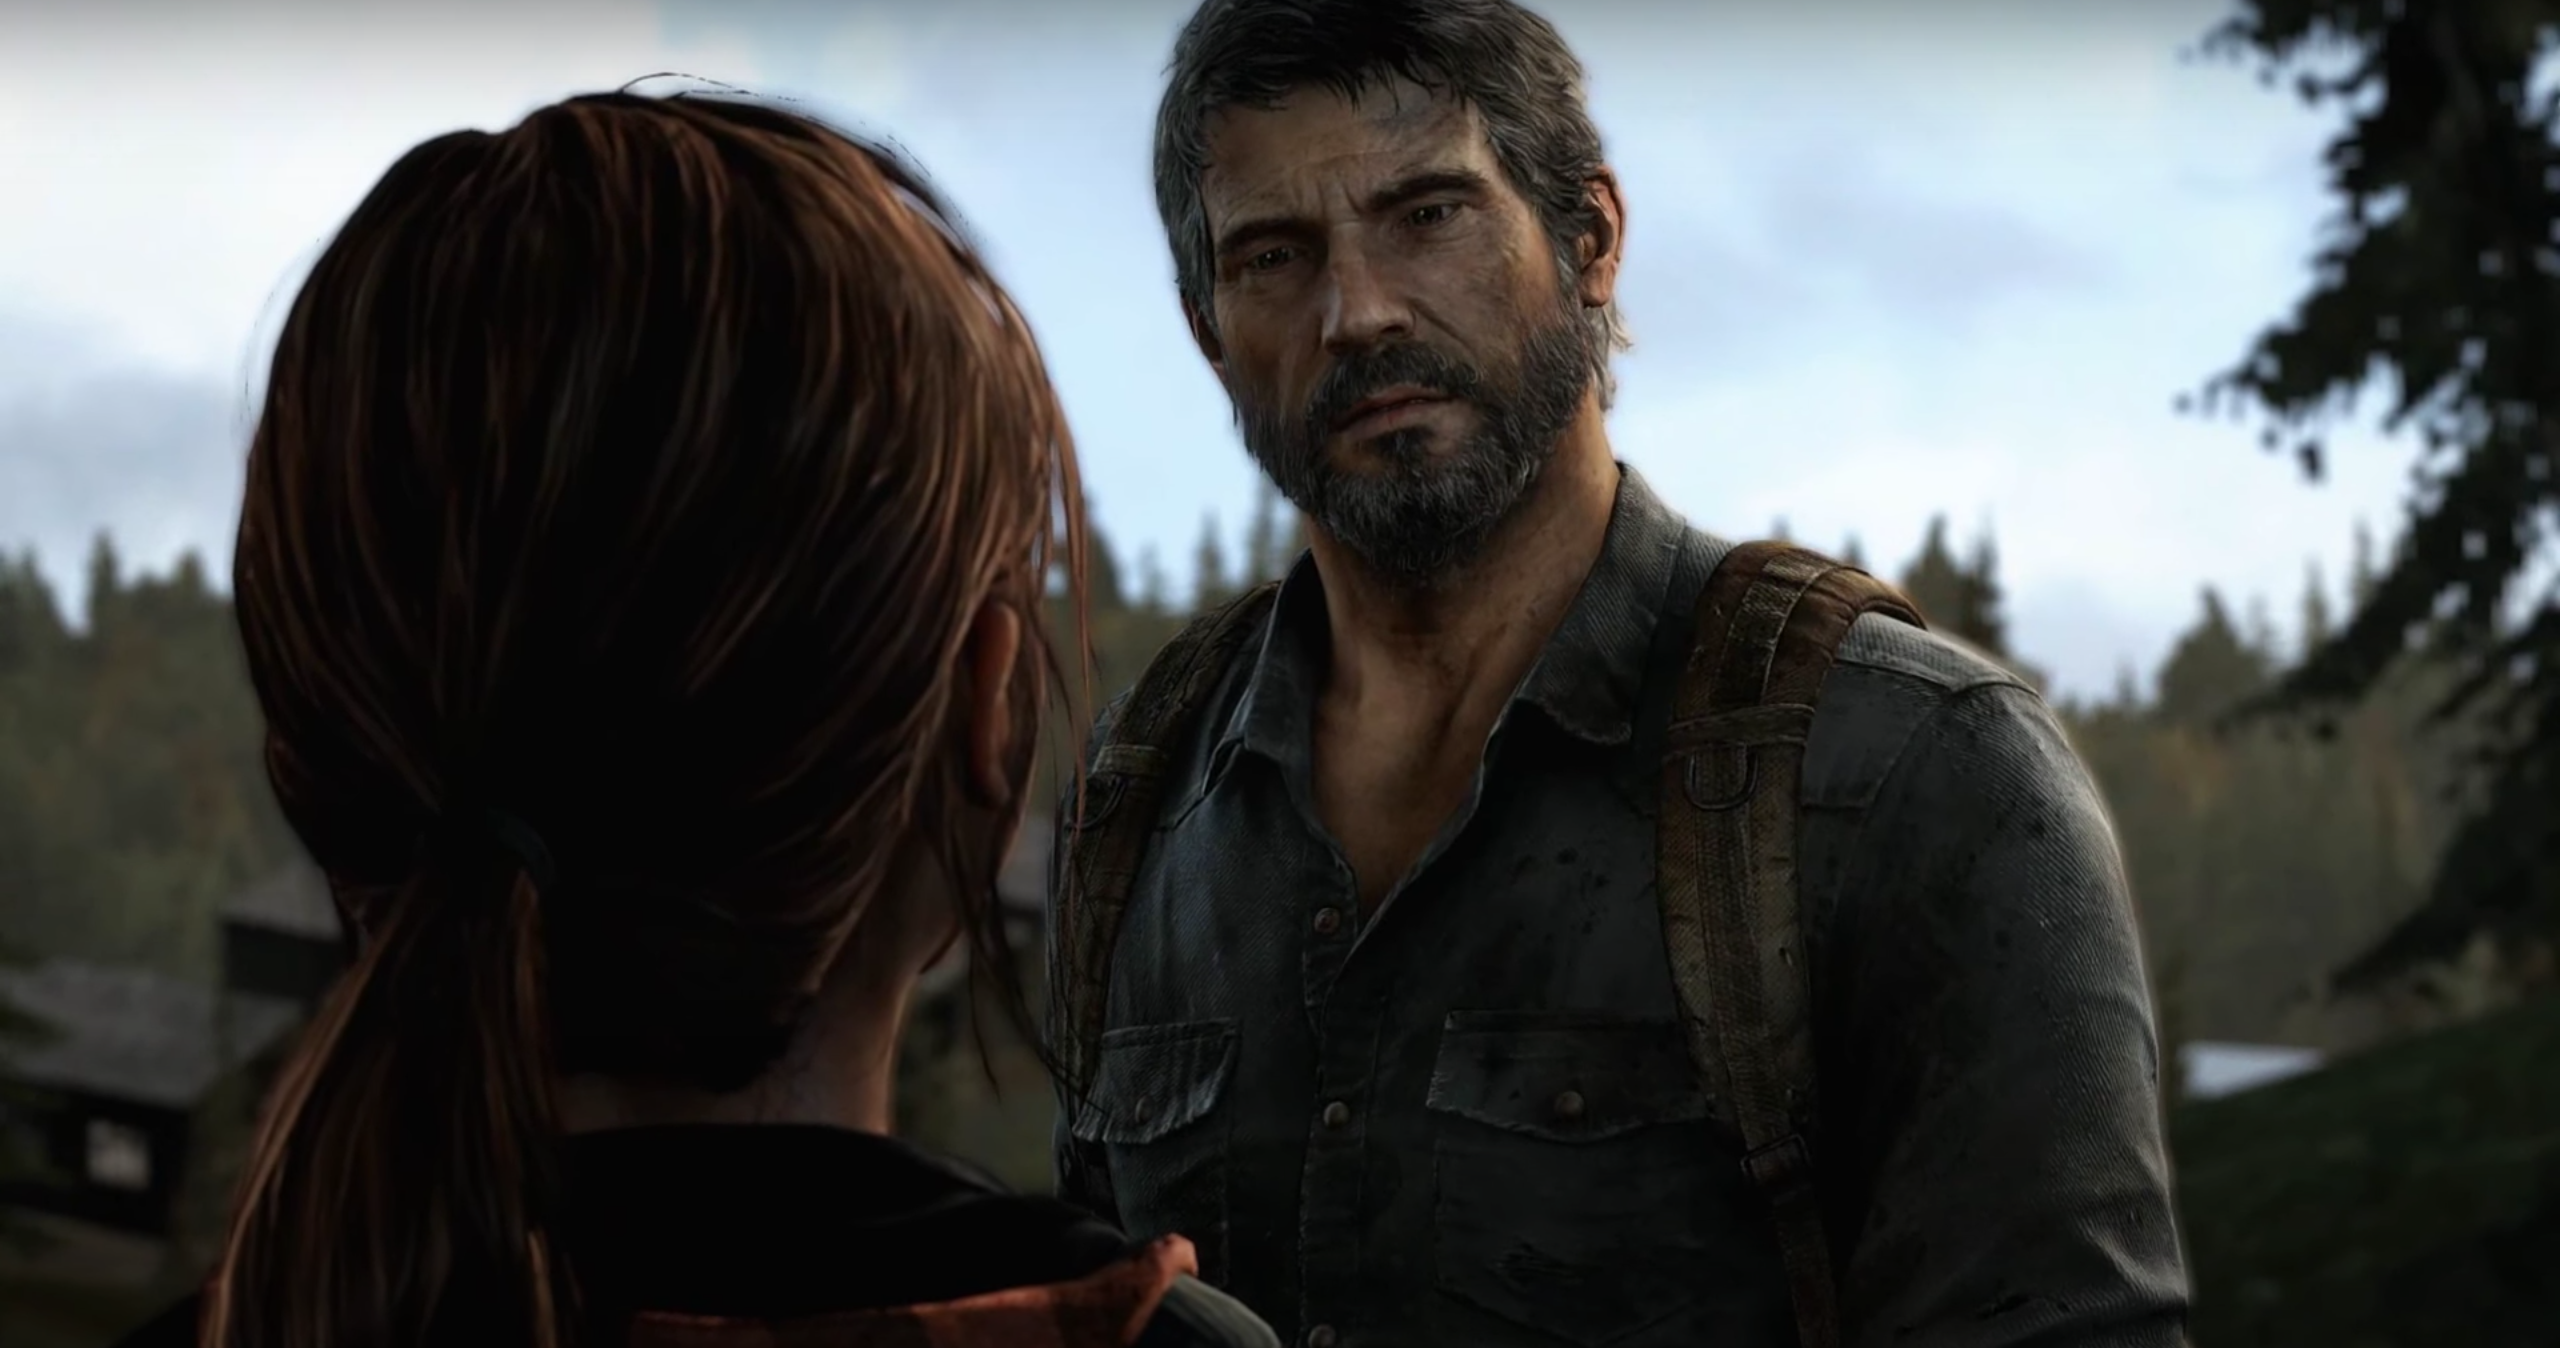 The Last of Us' Season 1 Ending Explained: What Happened?